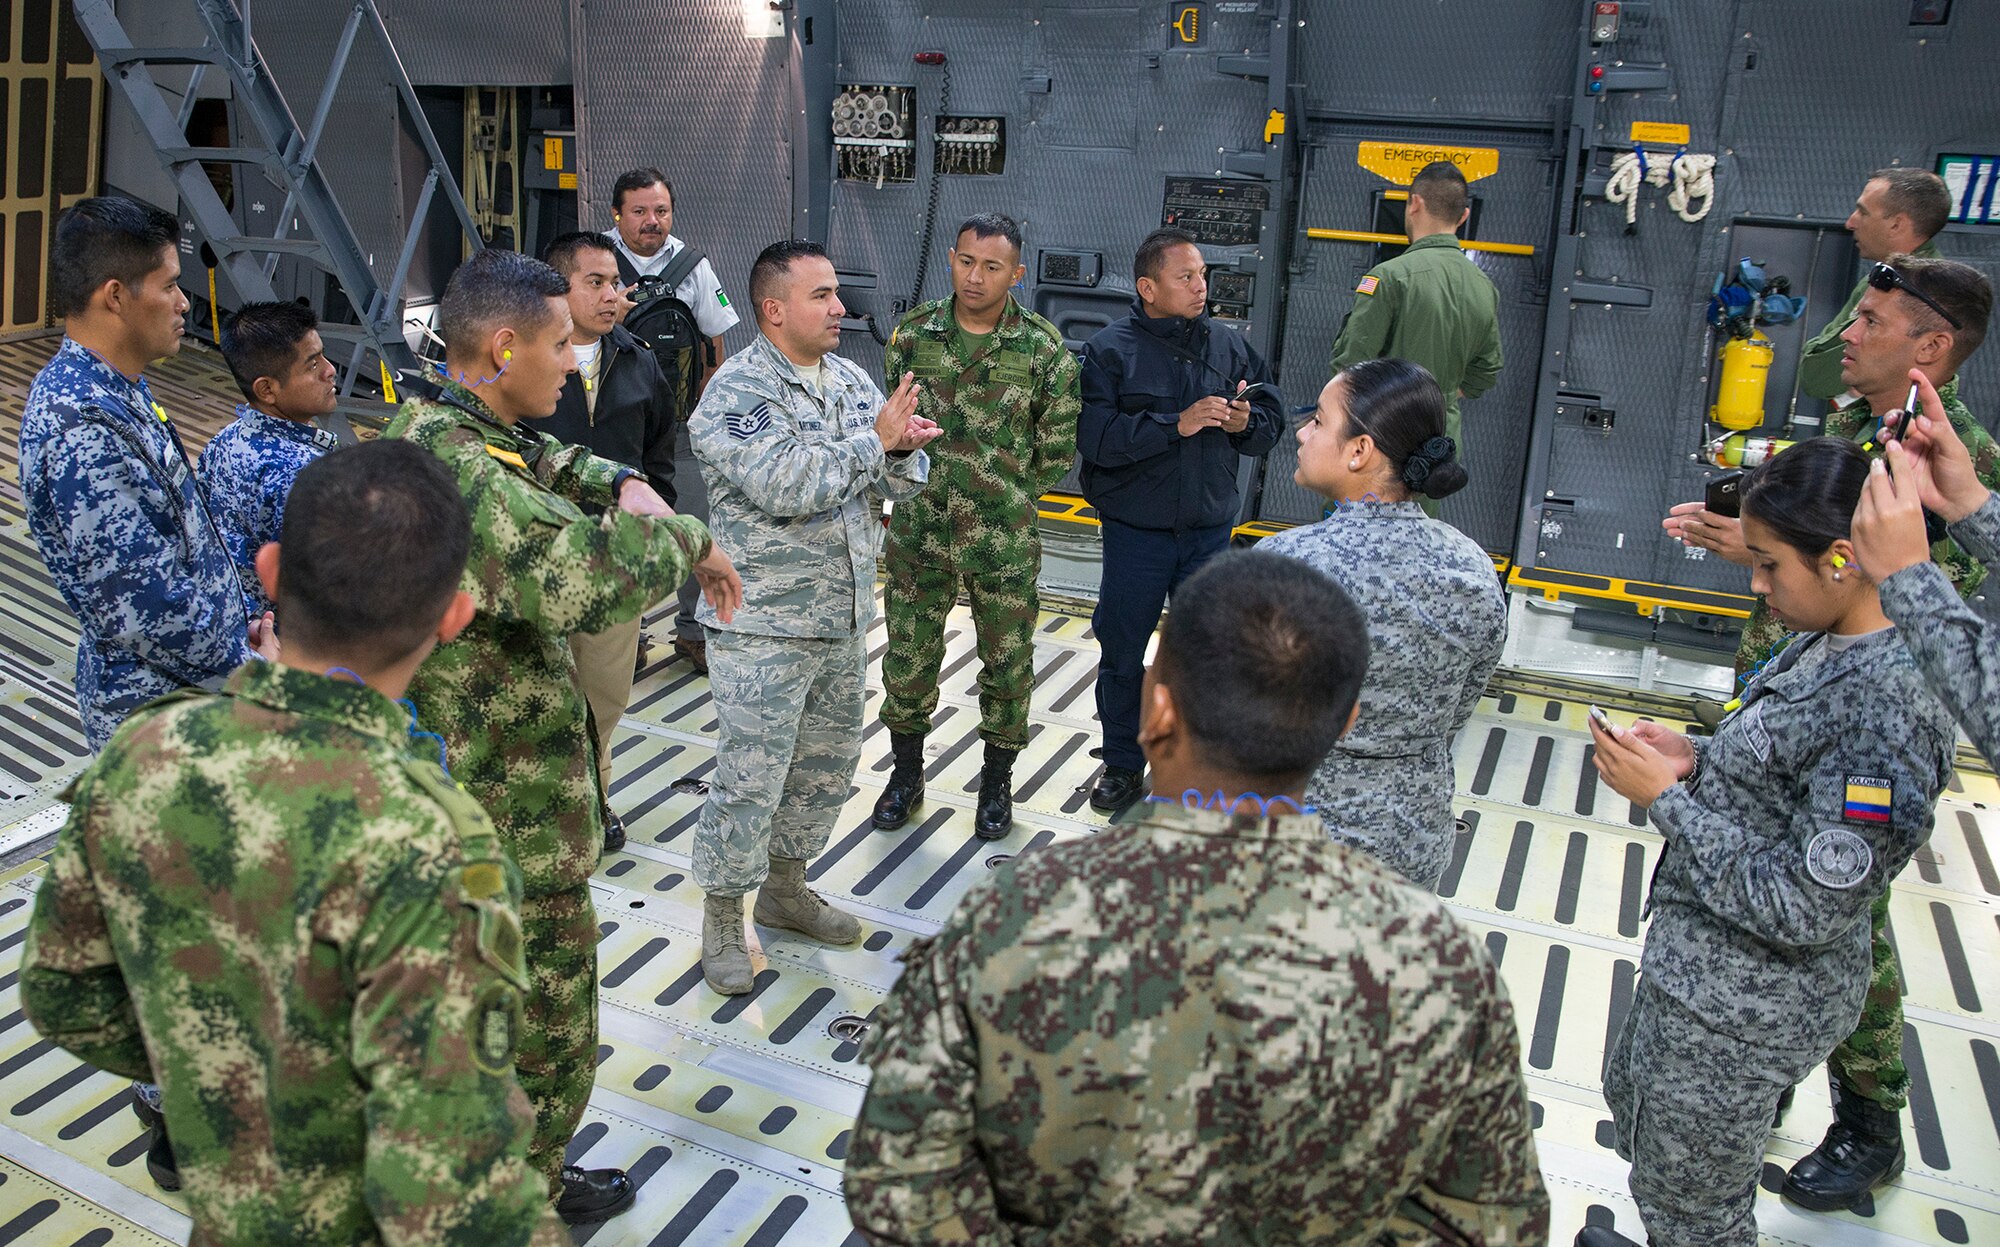 Students from the 318th Training Squadron, Inter American Air Forces Academy, tour a C-5M Super Galaxy Aircraft October 18, 2017 at Joint Base San Antonio-Lackland, Texas